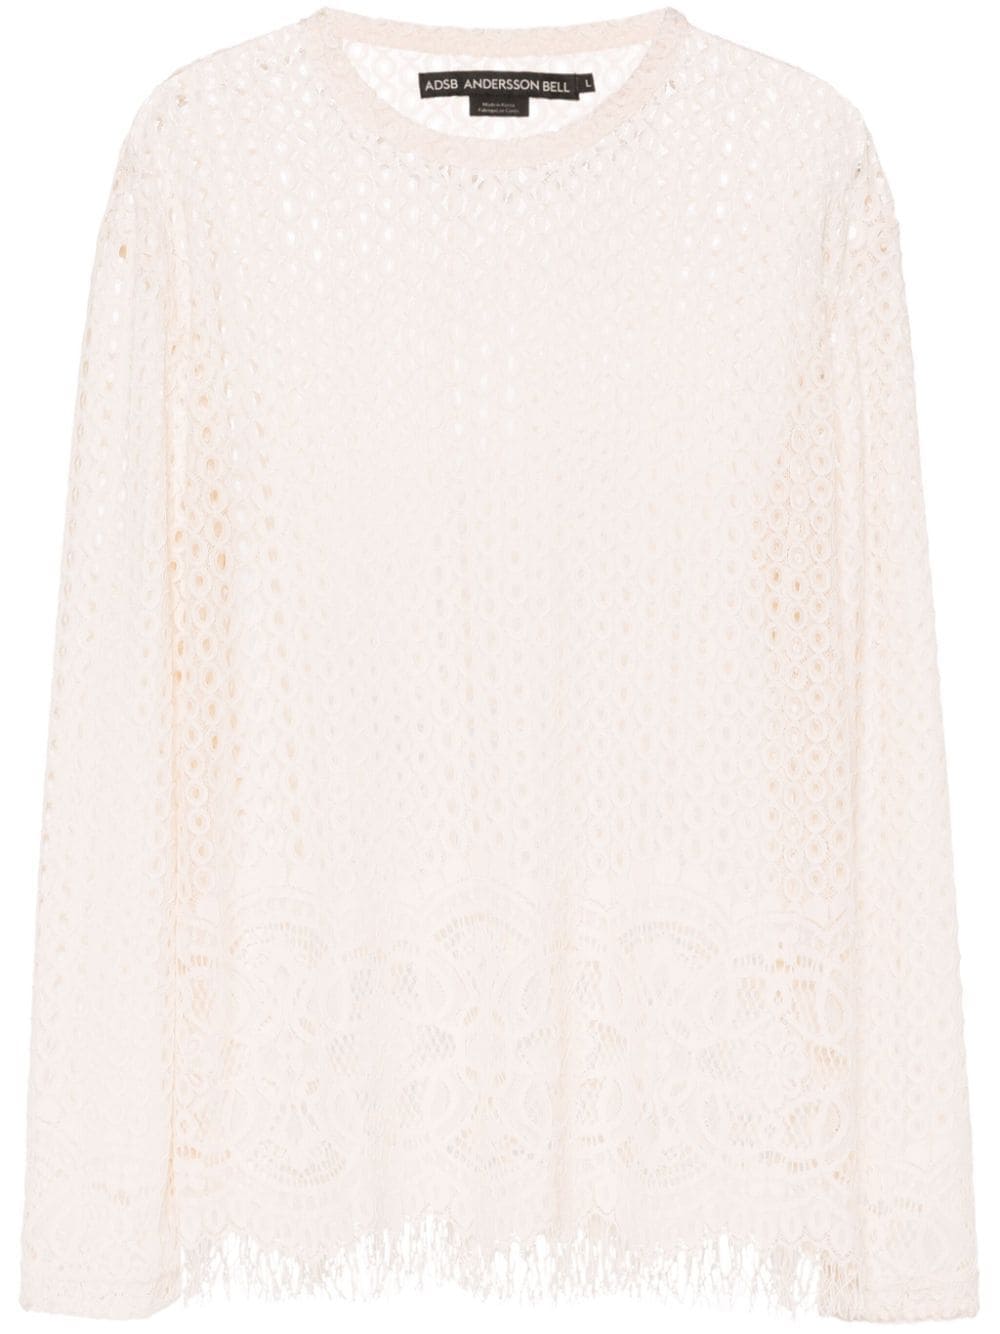 ANDERSSON BELL LACE LONG-SLEEVE T-SHIRT